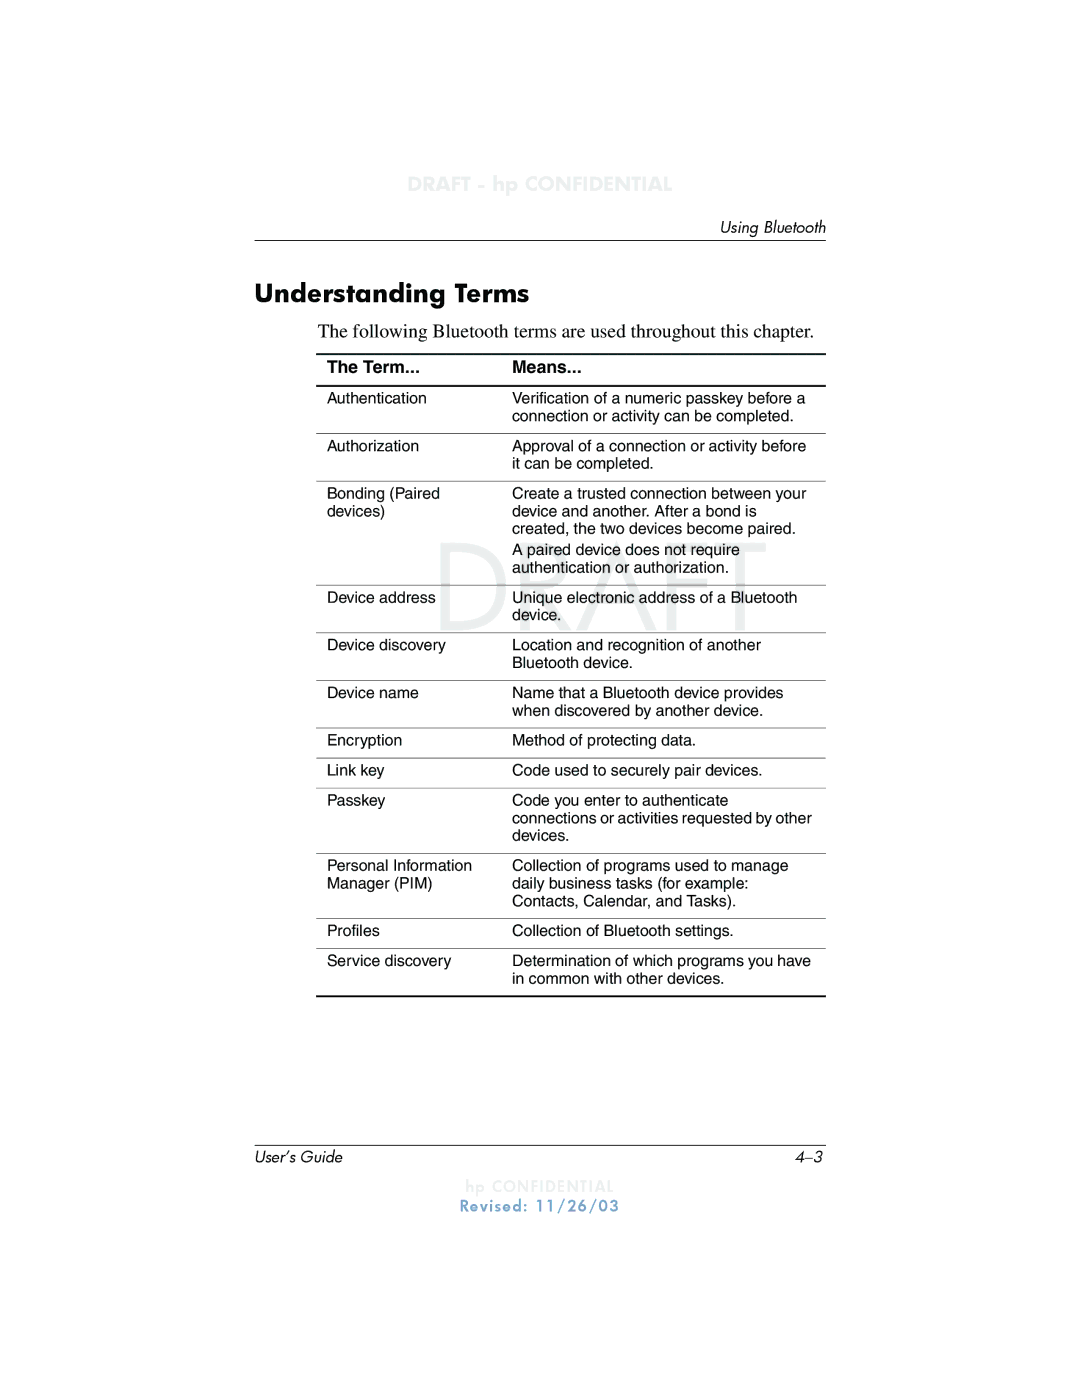 HP h6300 manual Understanding Terms, Following Bluetooth terms are used throughout this chapter 